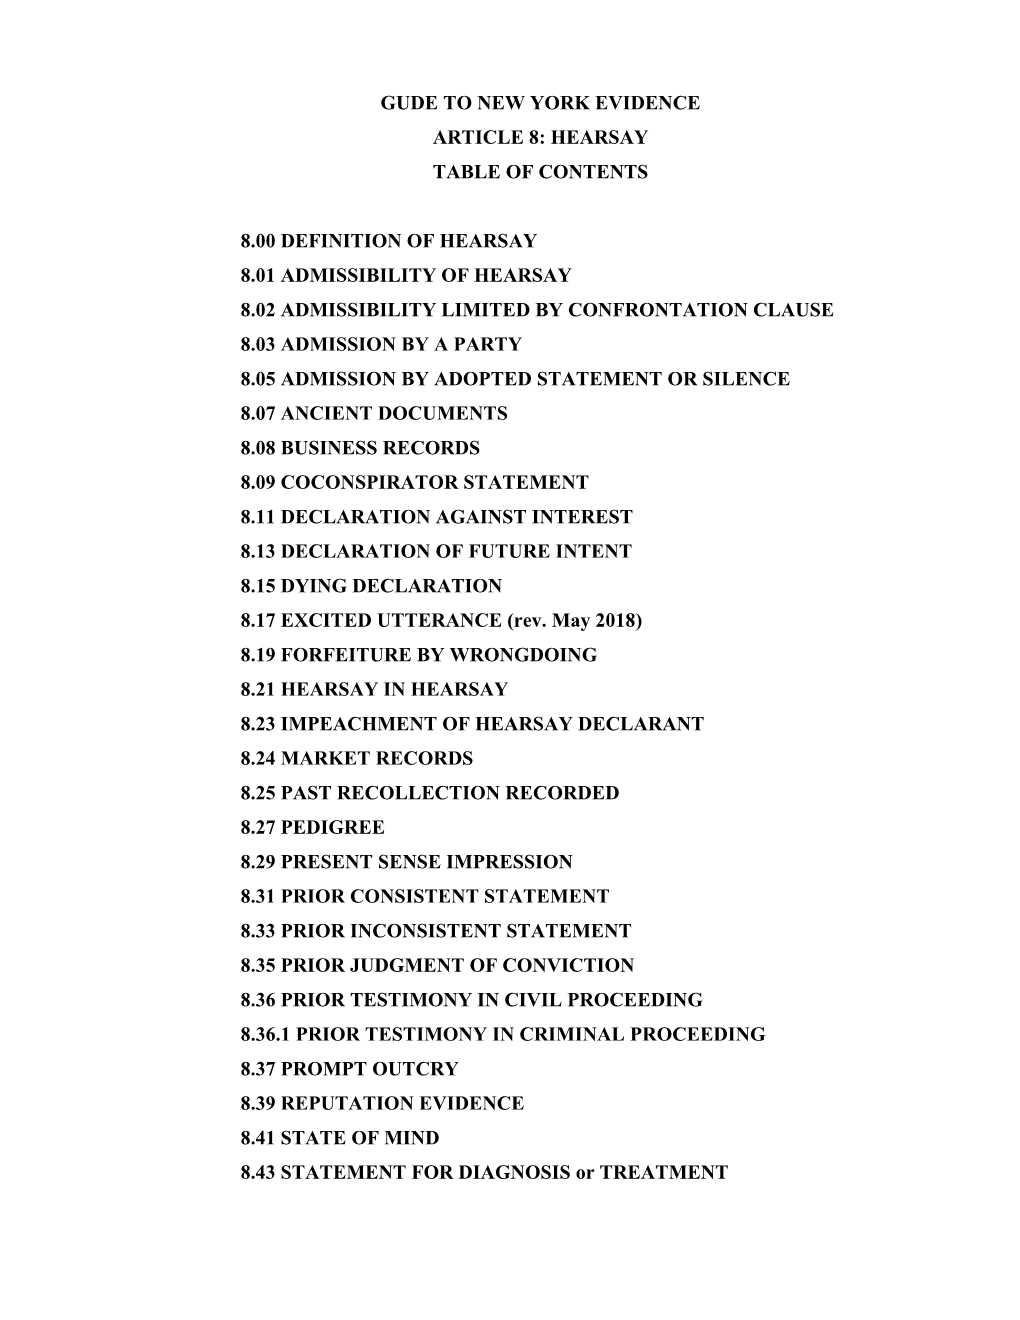 Gude to New York Evidence Article 8: Hearsay Table of Contents